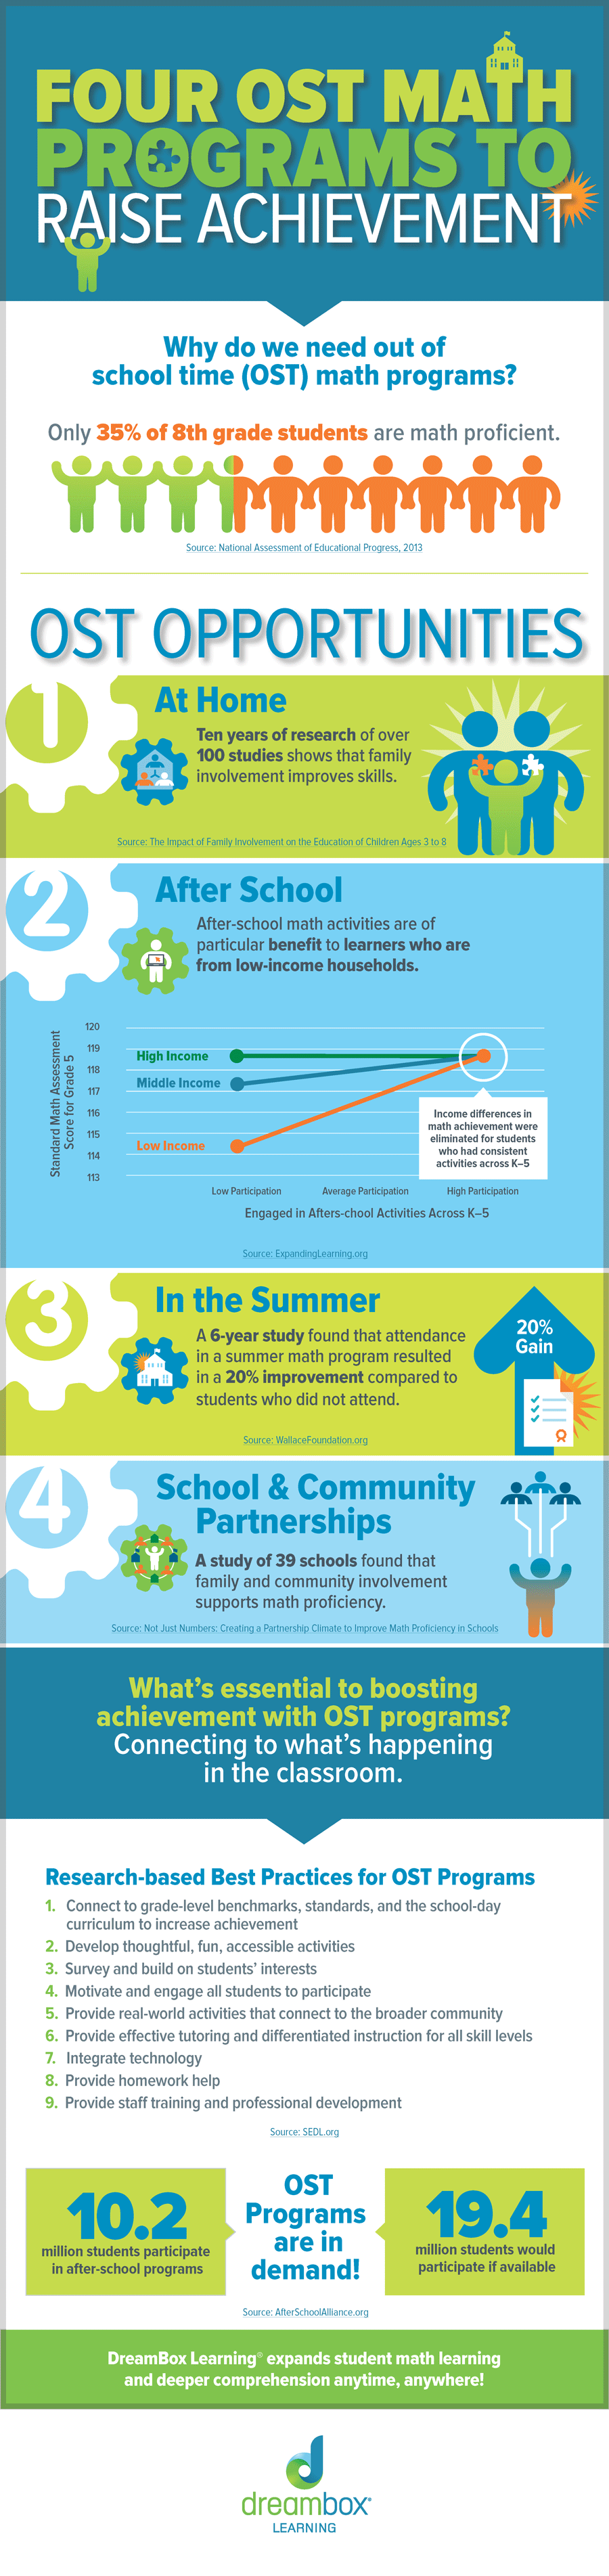 The Benefits of Out of School Math Programs Infographic